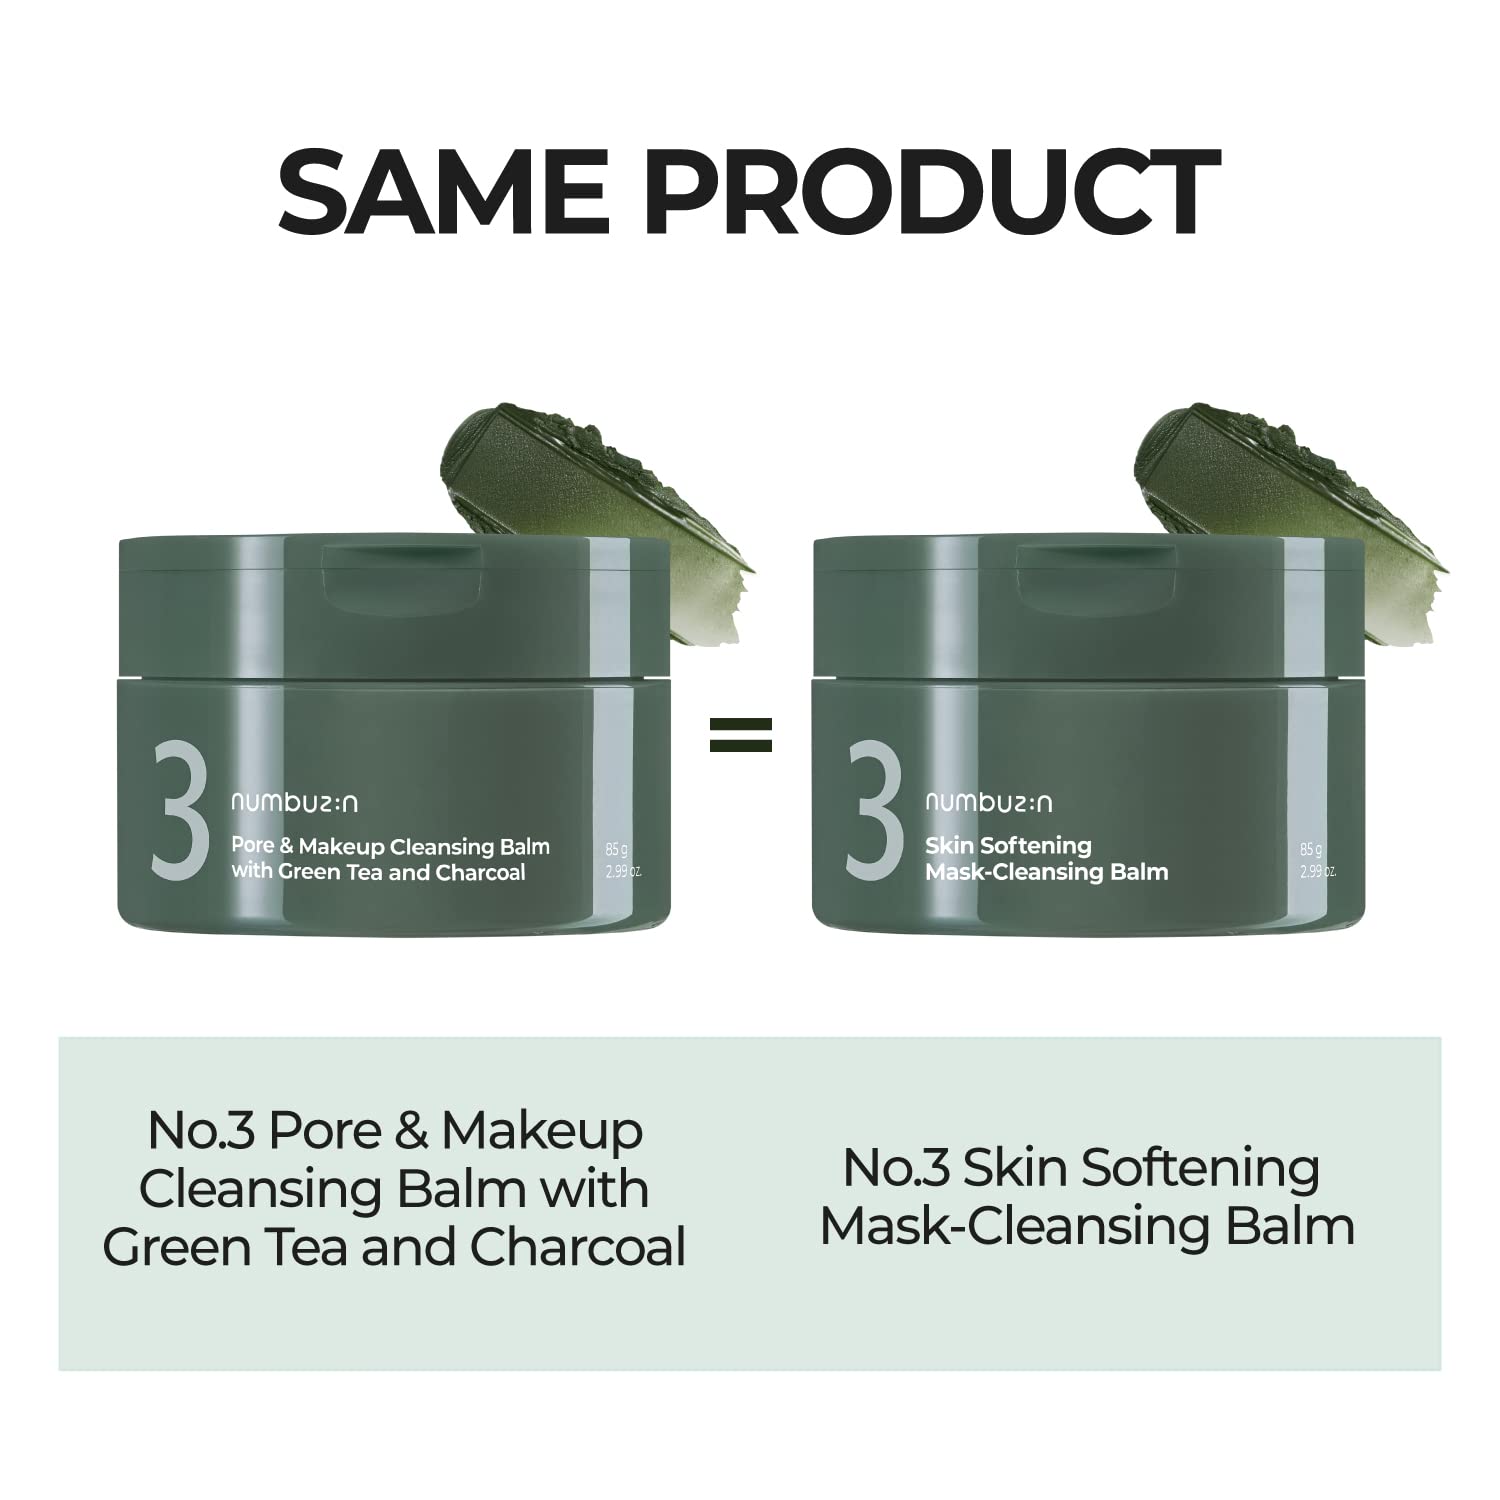 numbuz:n No.3 Pore & Makeup Cleansing Balm with Green Tea and Charcoal 85g / 2.99 oz. - image 3 of 6